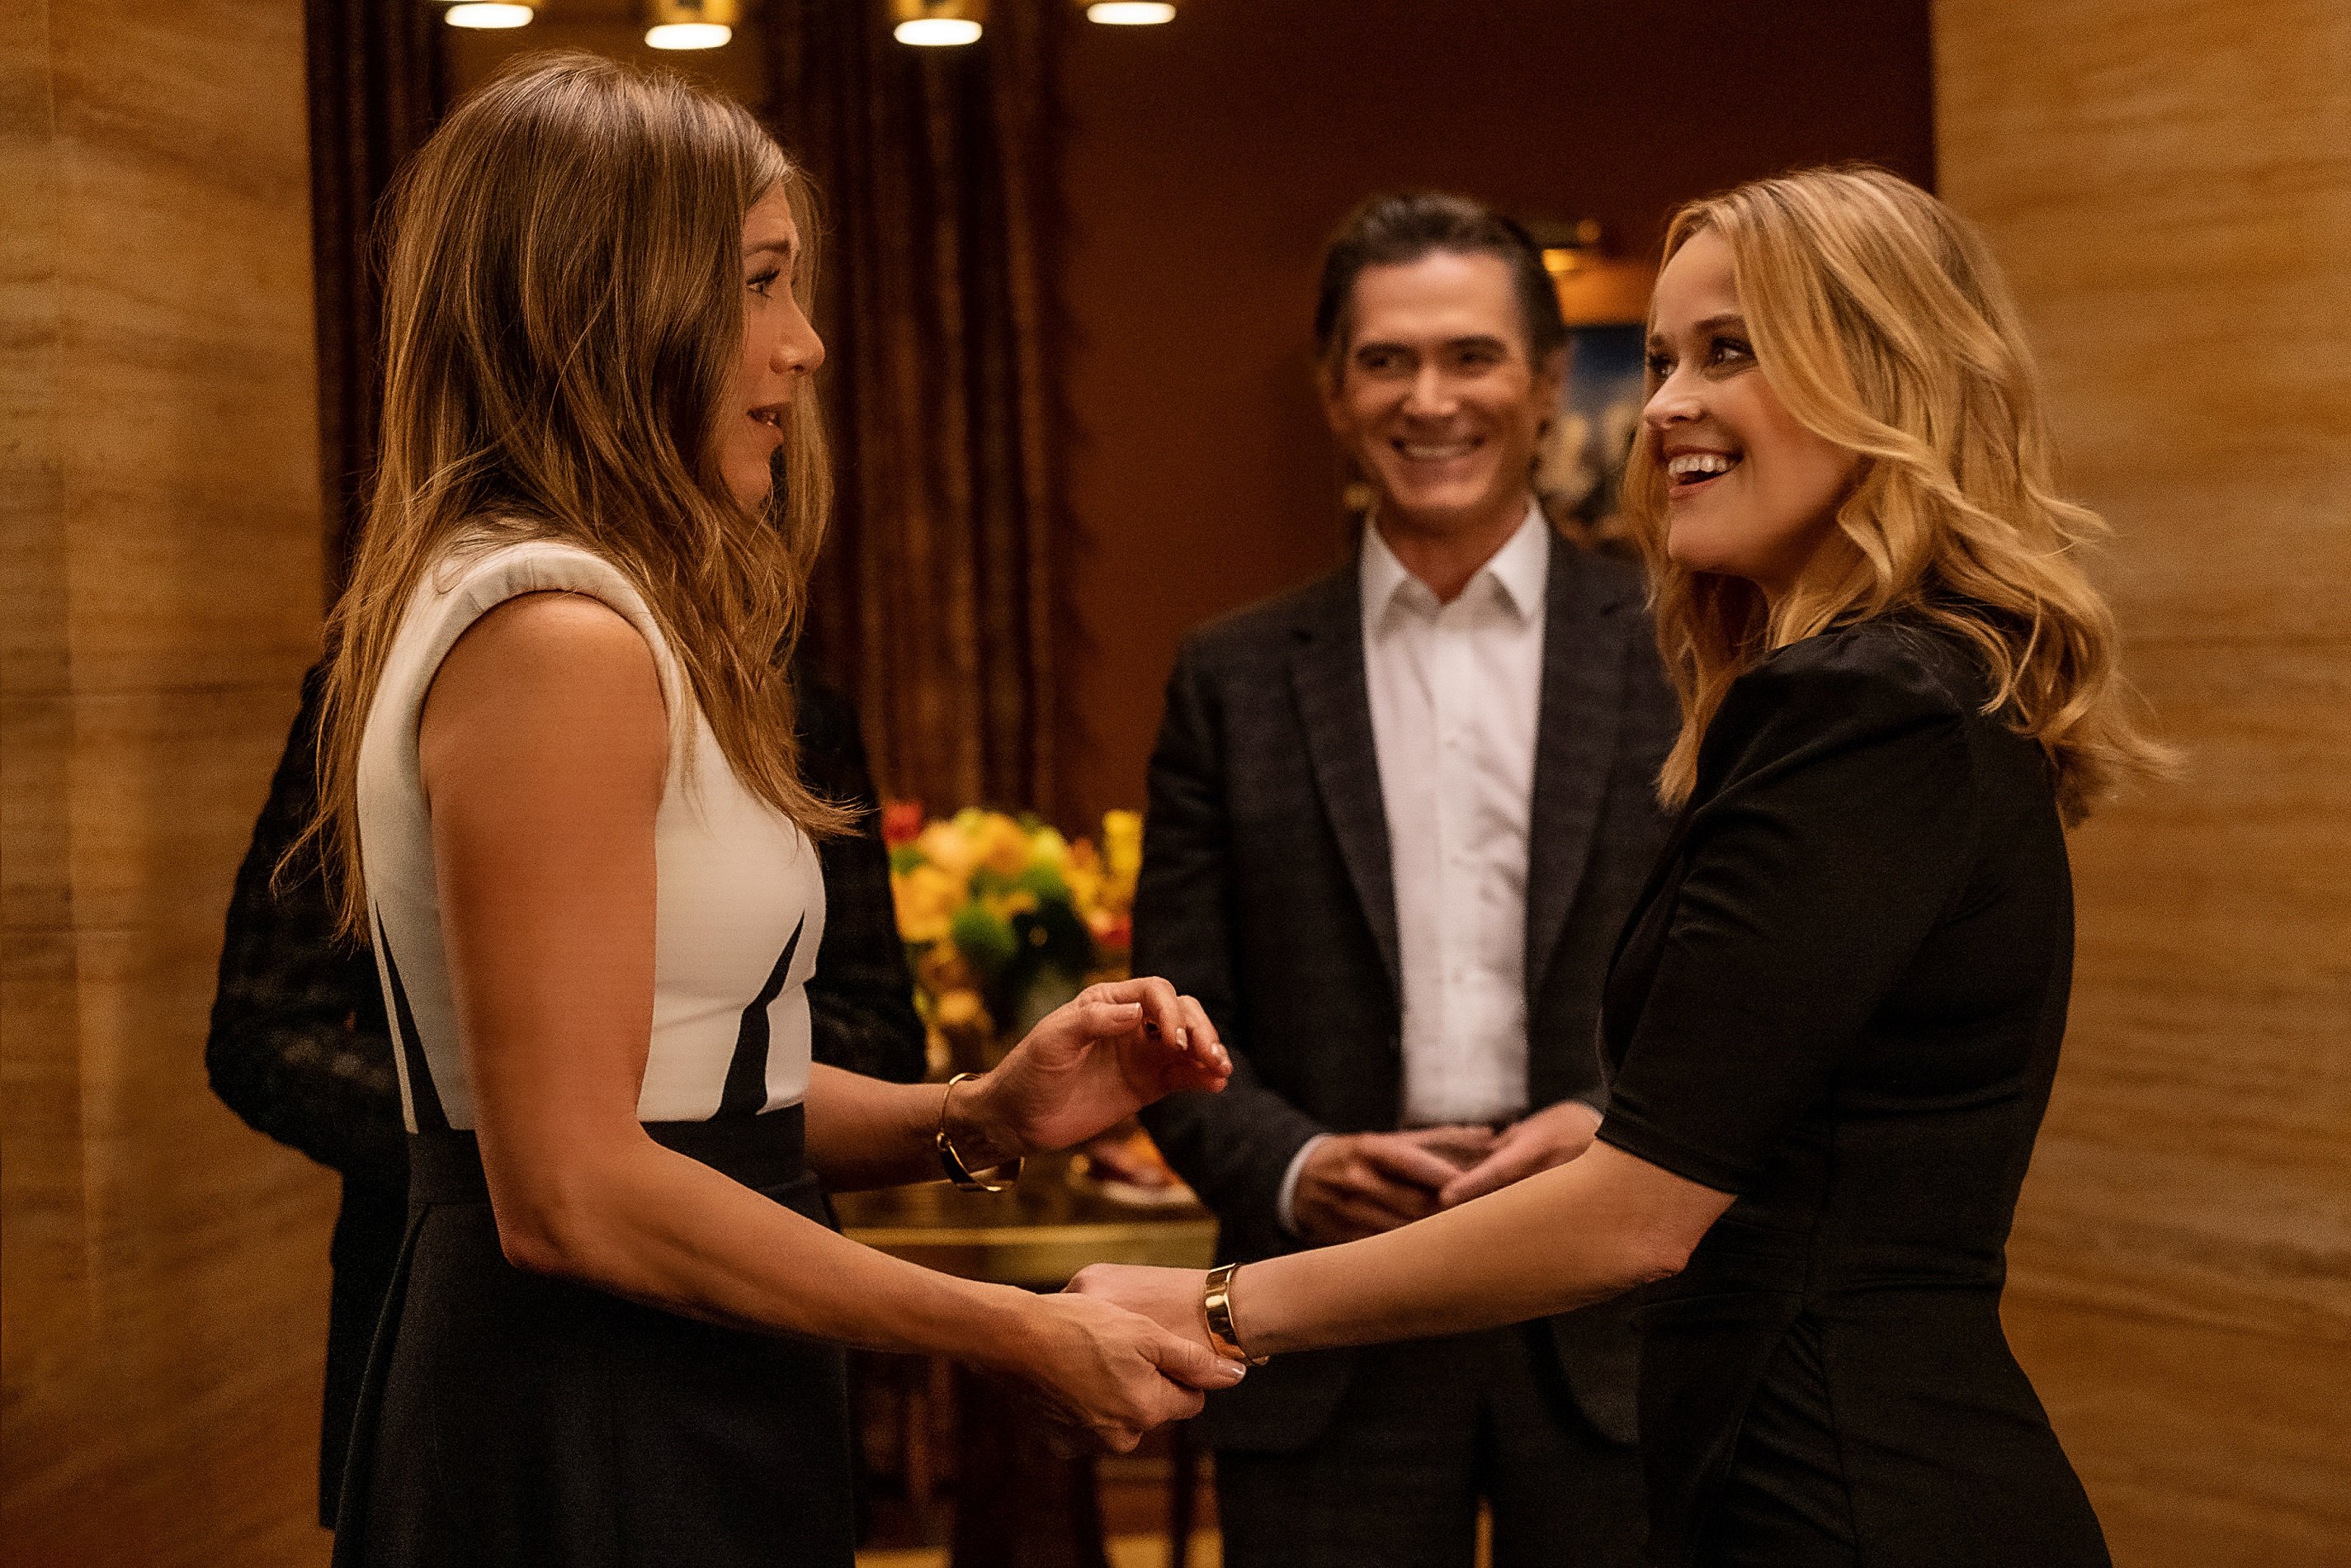 The Morning Show stars Jennifer Aniston and Reese Witherspoon hold hands as Billy Crudup smiles in a scene from season 2